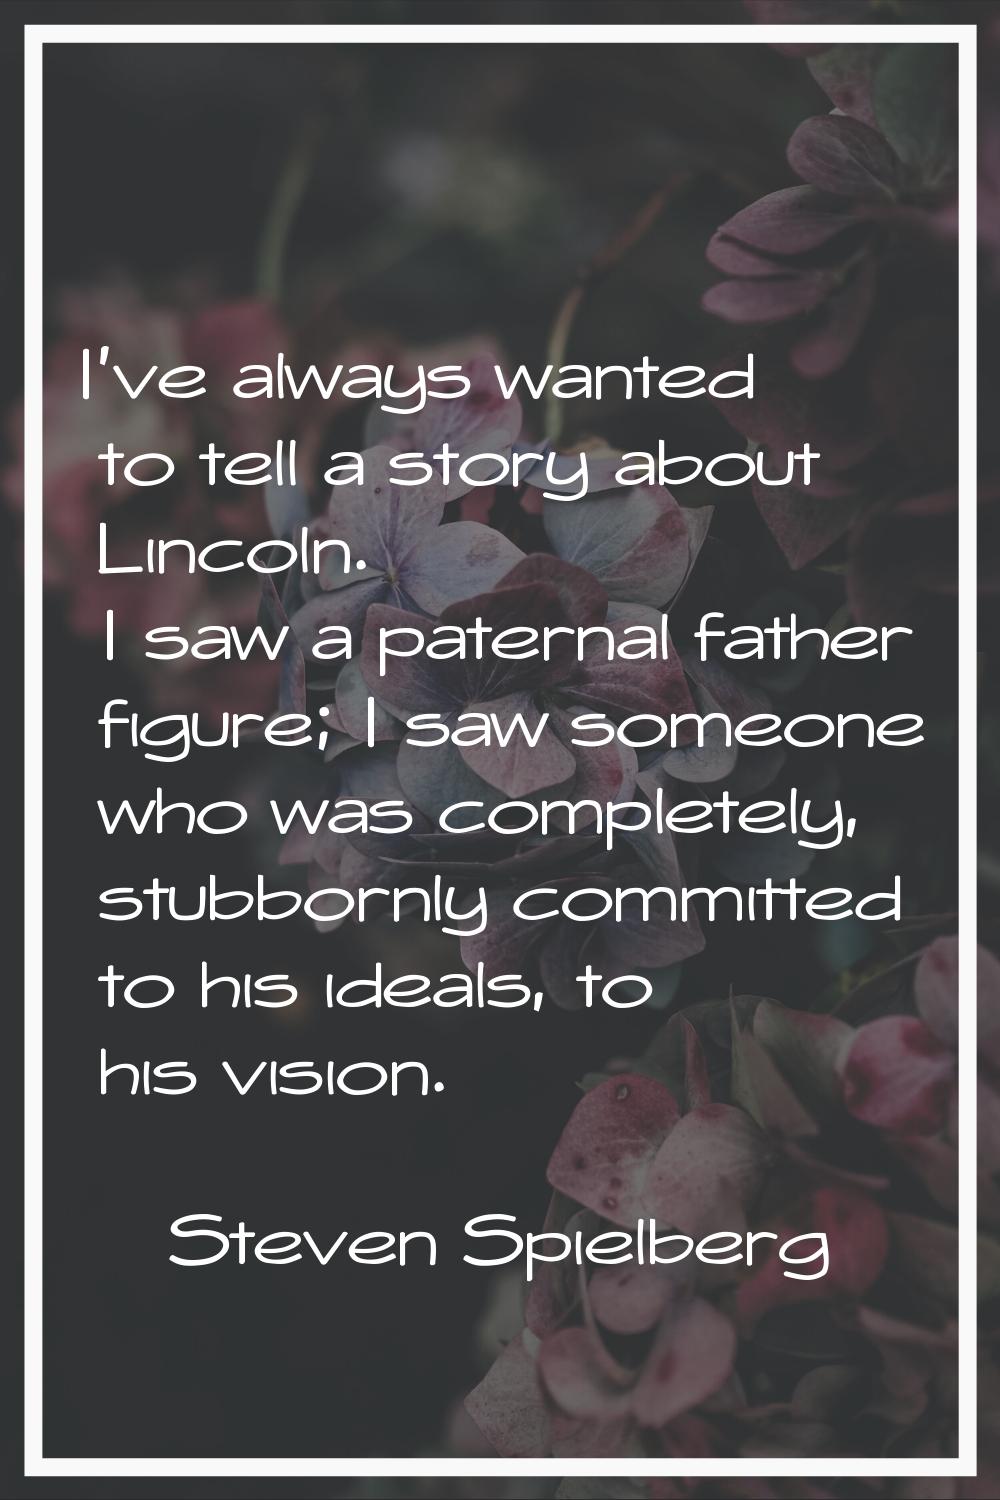 I've always wanted to tell a story about Lincoln. I saw a paternal father figure; I saw someone who